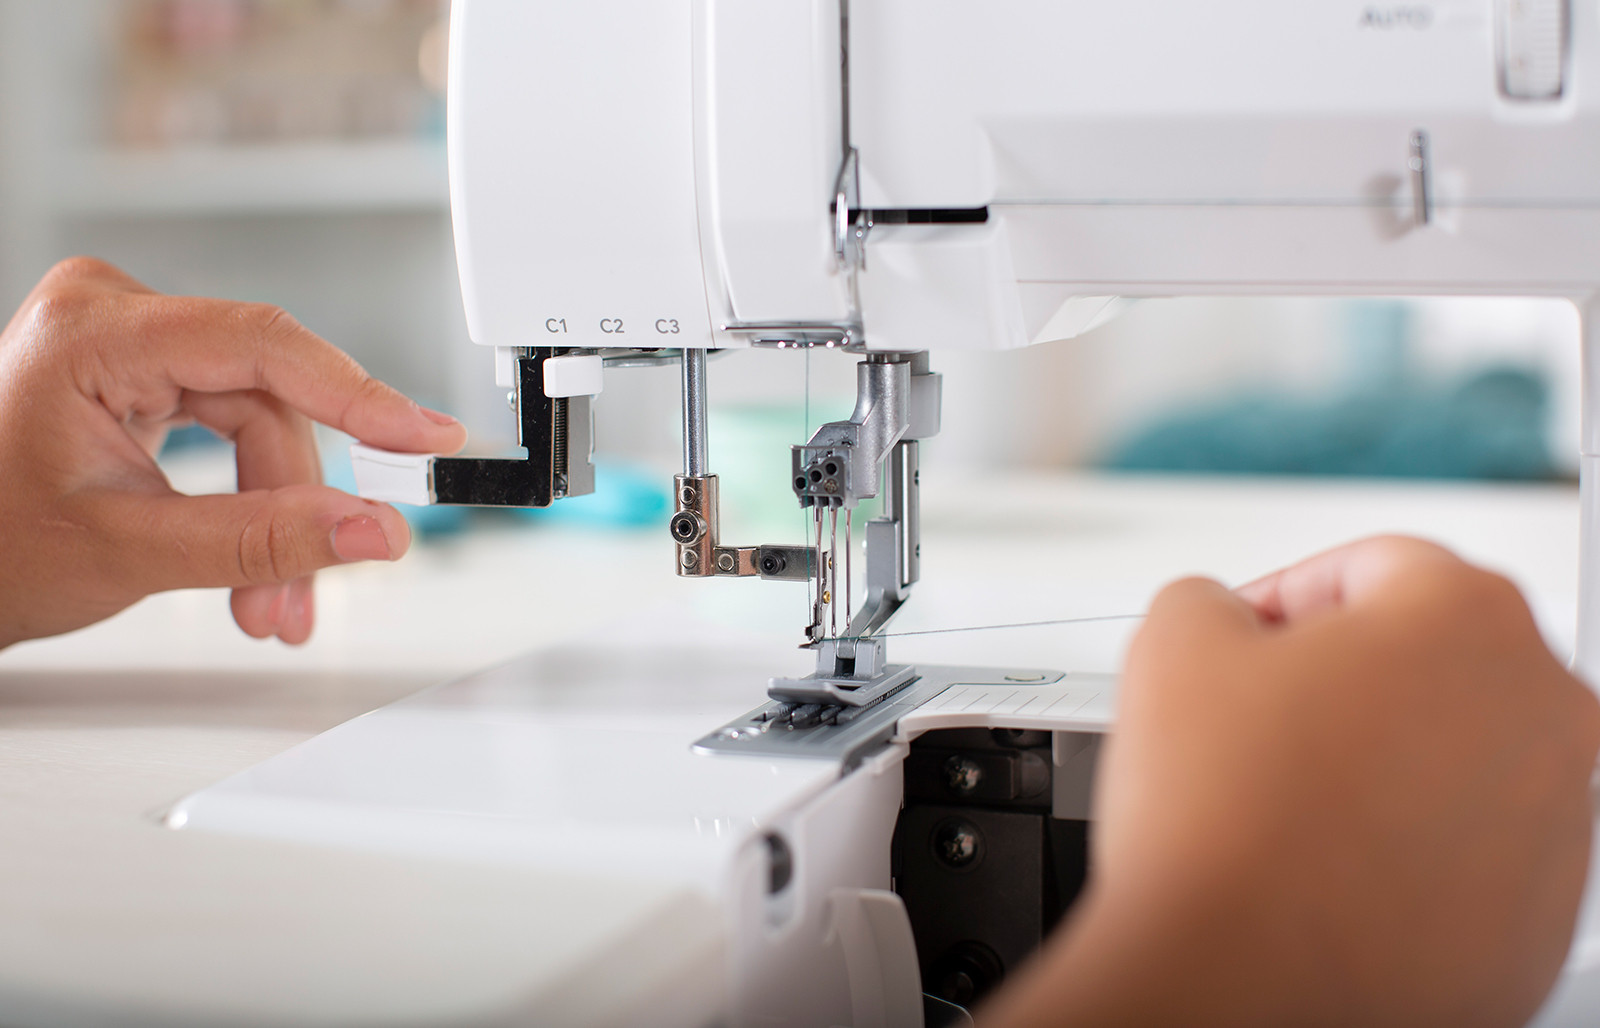 Image of Maker Threading The Needles on a Baby Lock Serger